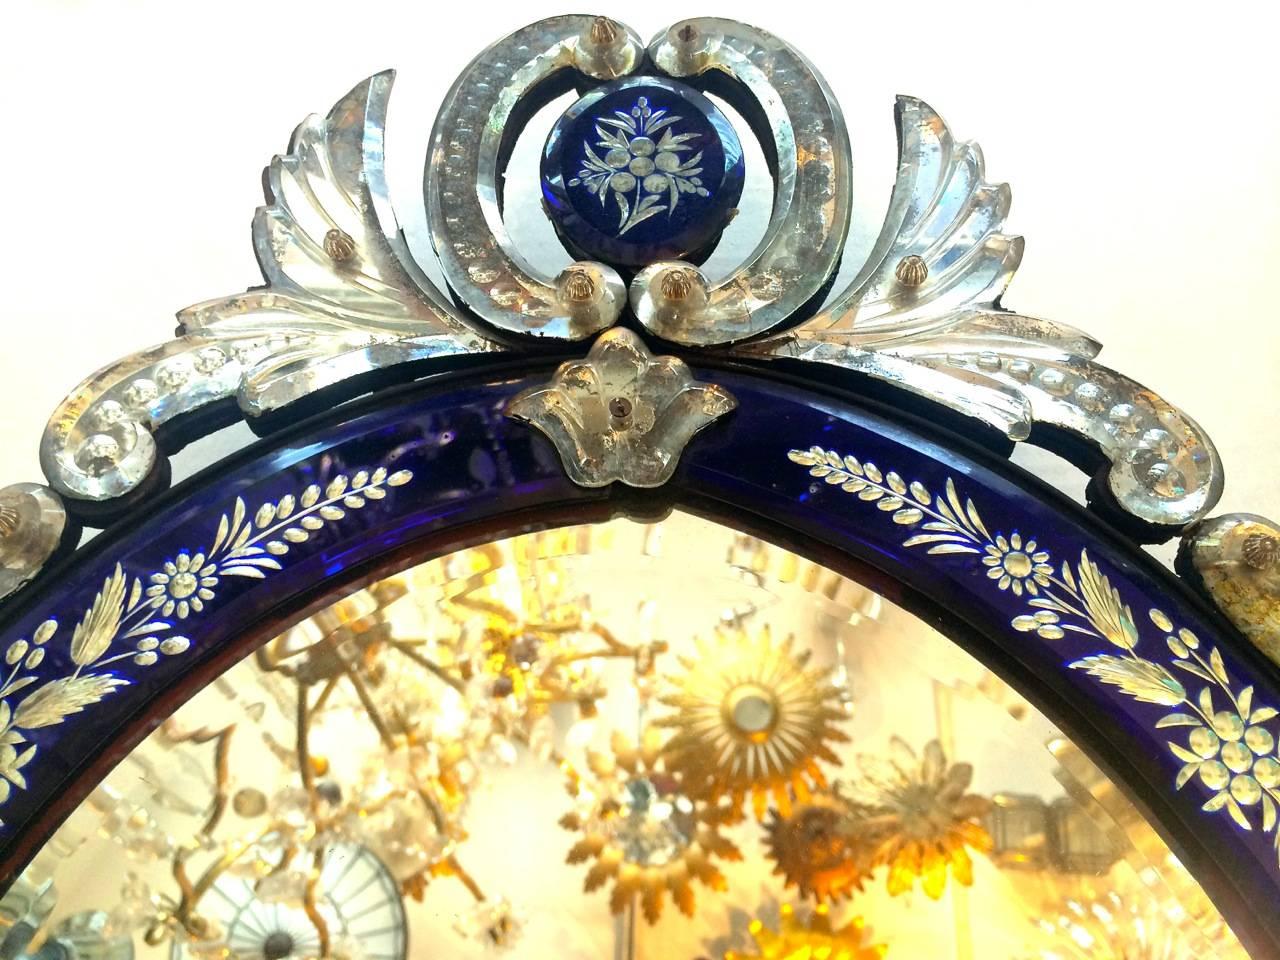 A Venetian circa 1930's etched mirror with cobalt blue mirrored frame

Measurements:
Height: 28